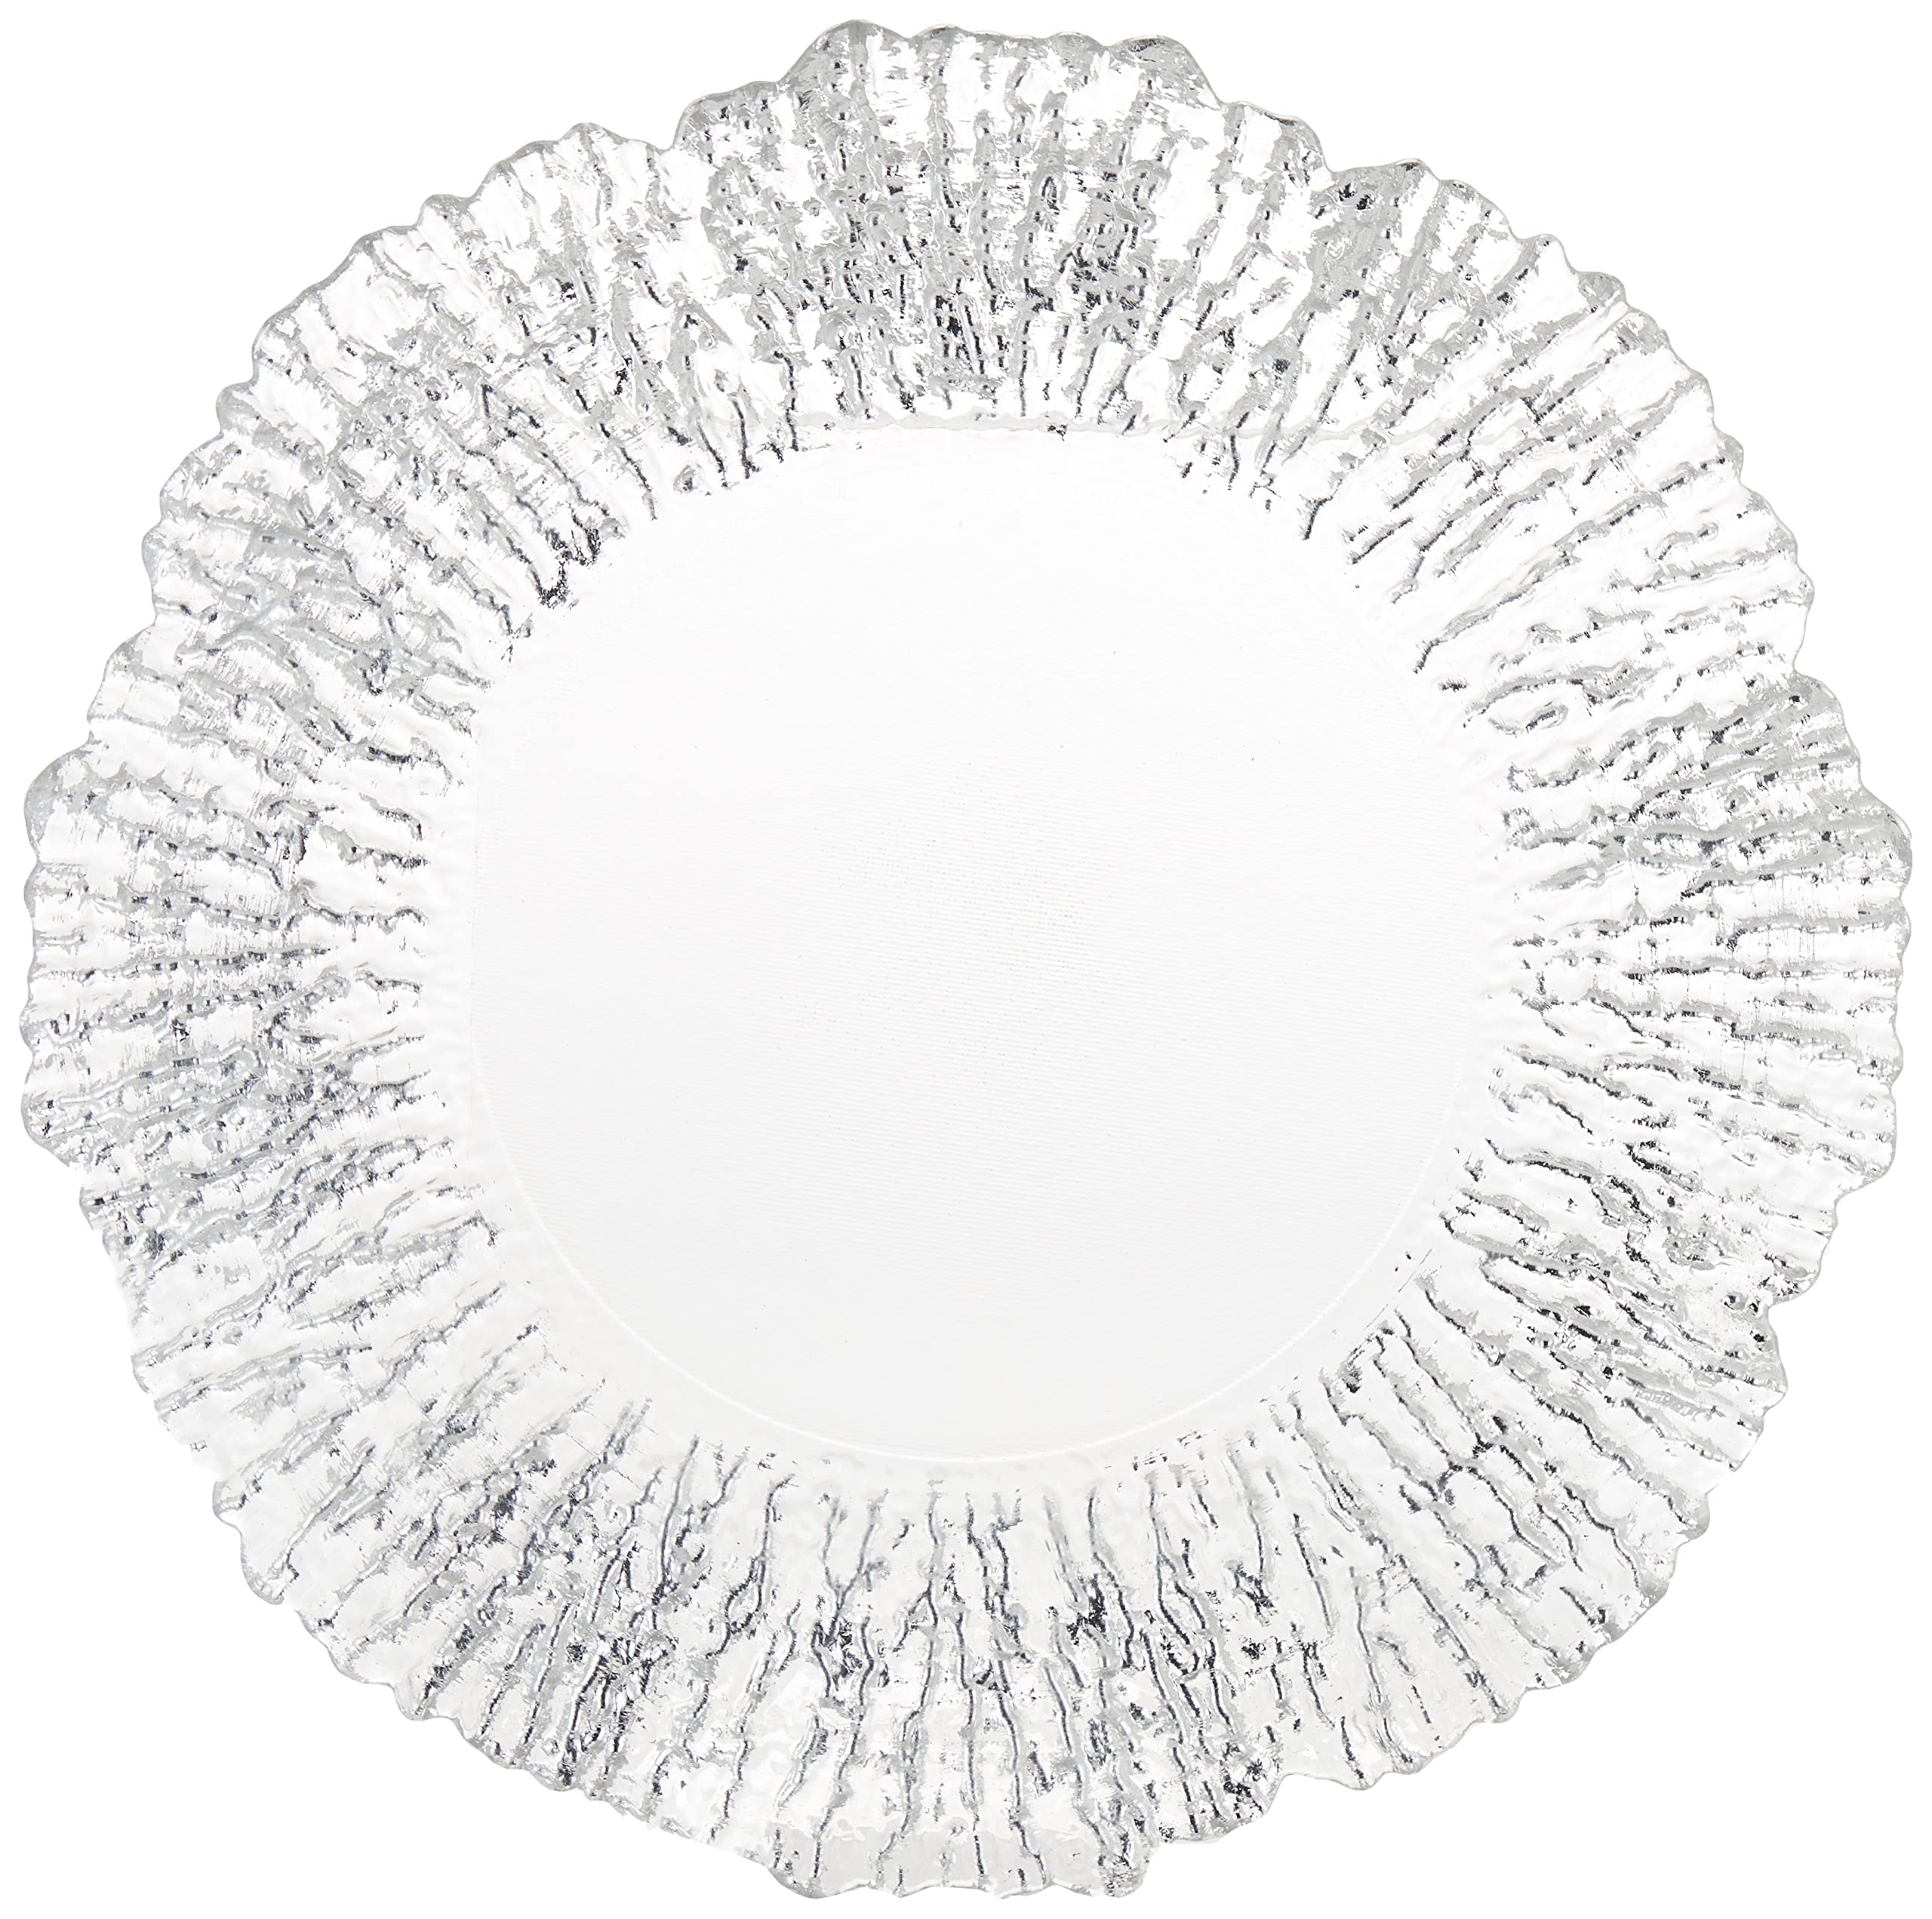 ChargeIt by Jay Flower Charger Large 13” Decorative Glass Service Plate for Home Or Professional Fine Dining-For Upscale Catering Events, Dinner Parties, Or Weddings, Silver